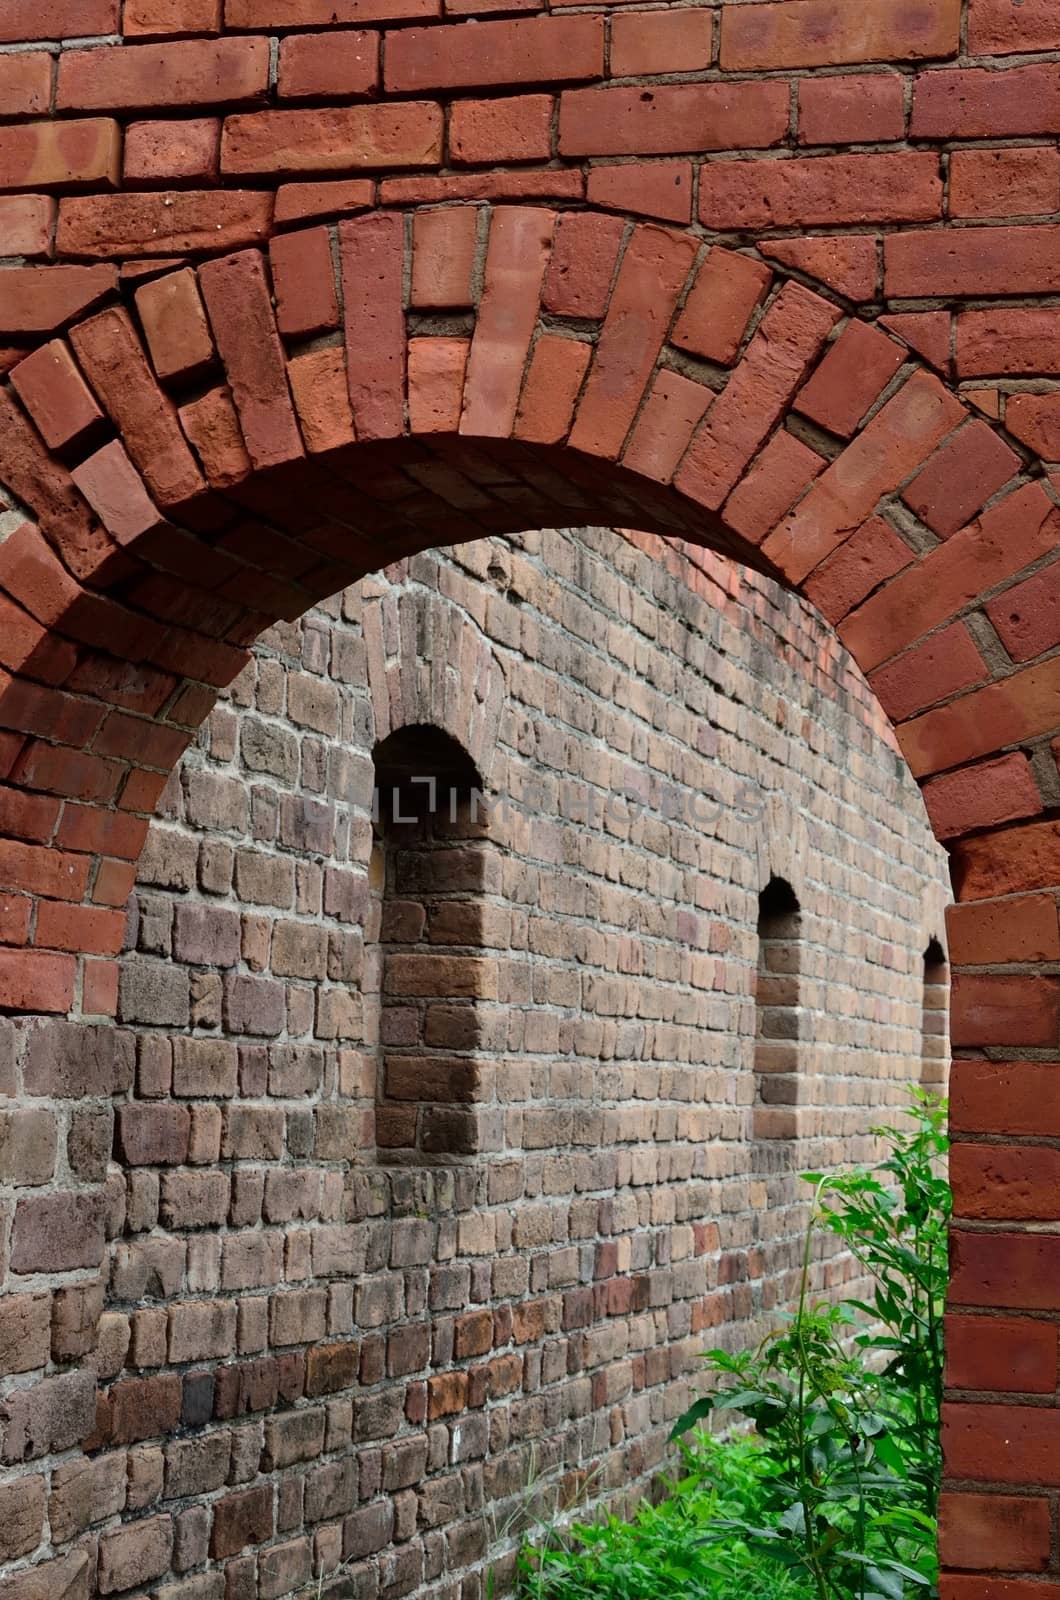 Red brick arch inside Civil war era fort at Fort Clinch State Park in Nassau County, Florida